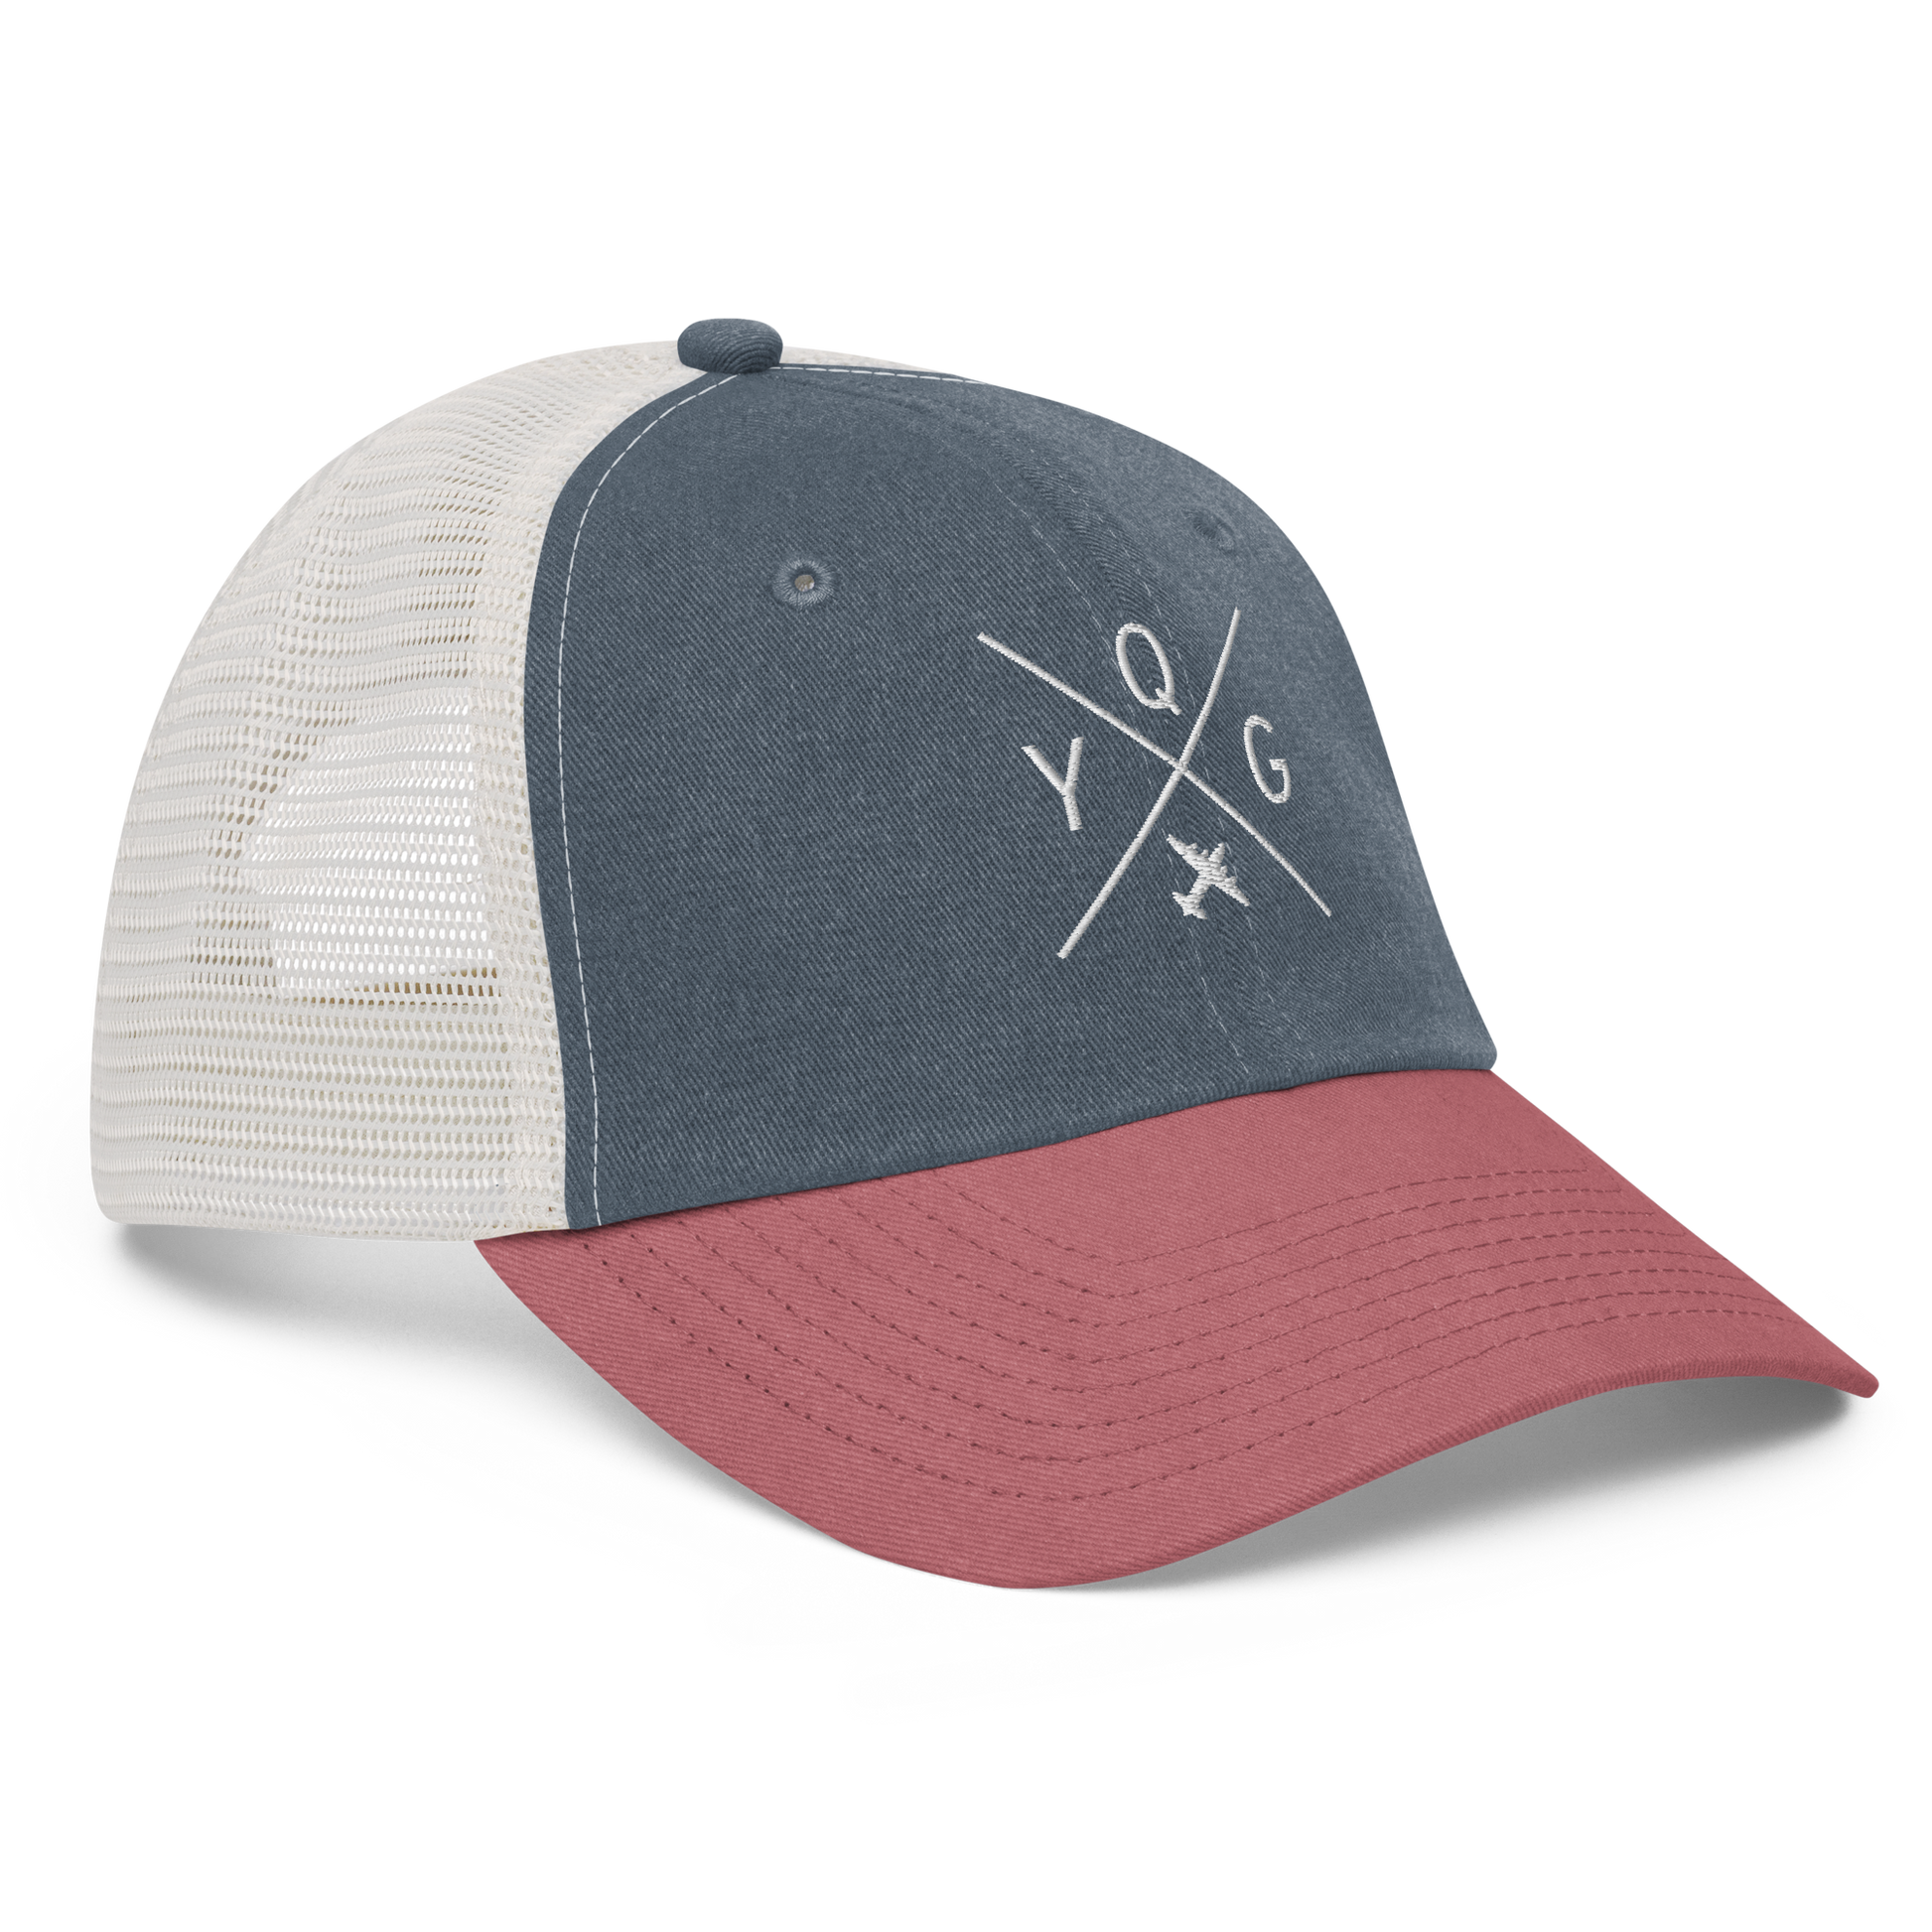 YHM Designs - YQG Windsor Pigment-Dyed Trucker Cap - Crossed-X Design with Airport Code and Vintage Propliner - White Embroidery - Image 13